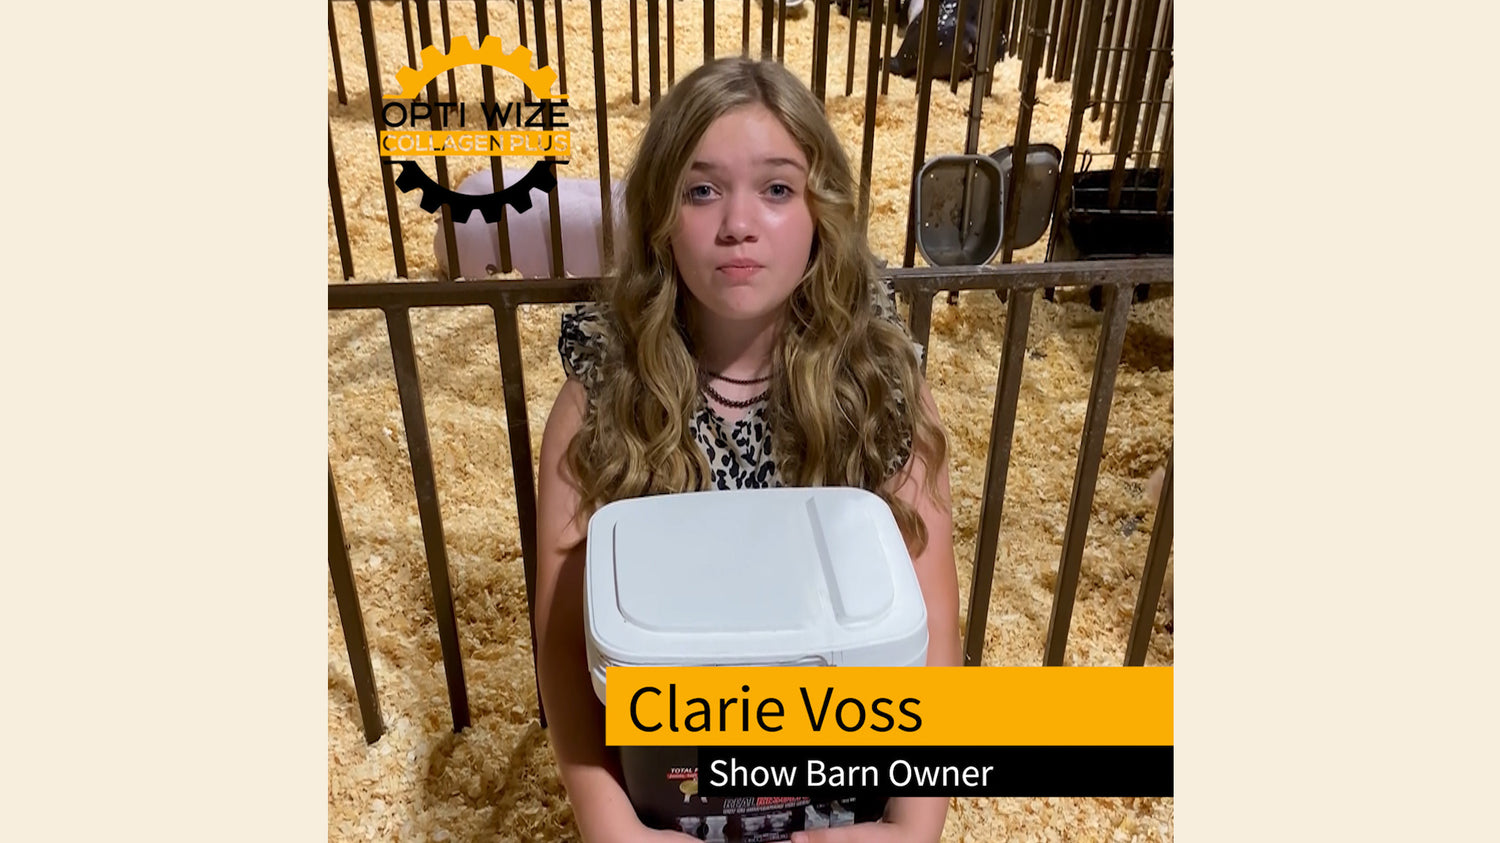 <p>Claire Voss is a champion showpigs breeder. Her OG sired blue barrow (Raised by. Wilber Genetics) strikes again! Champion Light Cross</p><p>Claire shares how OptiWize helped her gilt with swollen hocks. Now OptiWize is will always be in her feed room as her joint tendon and ligament supplement for pigs.</p>